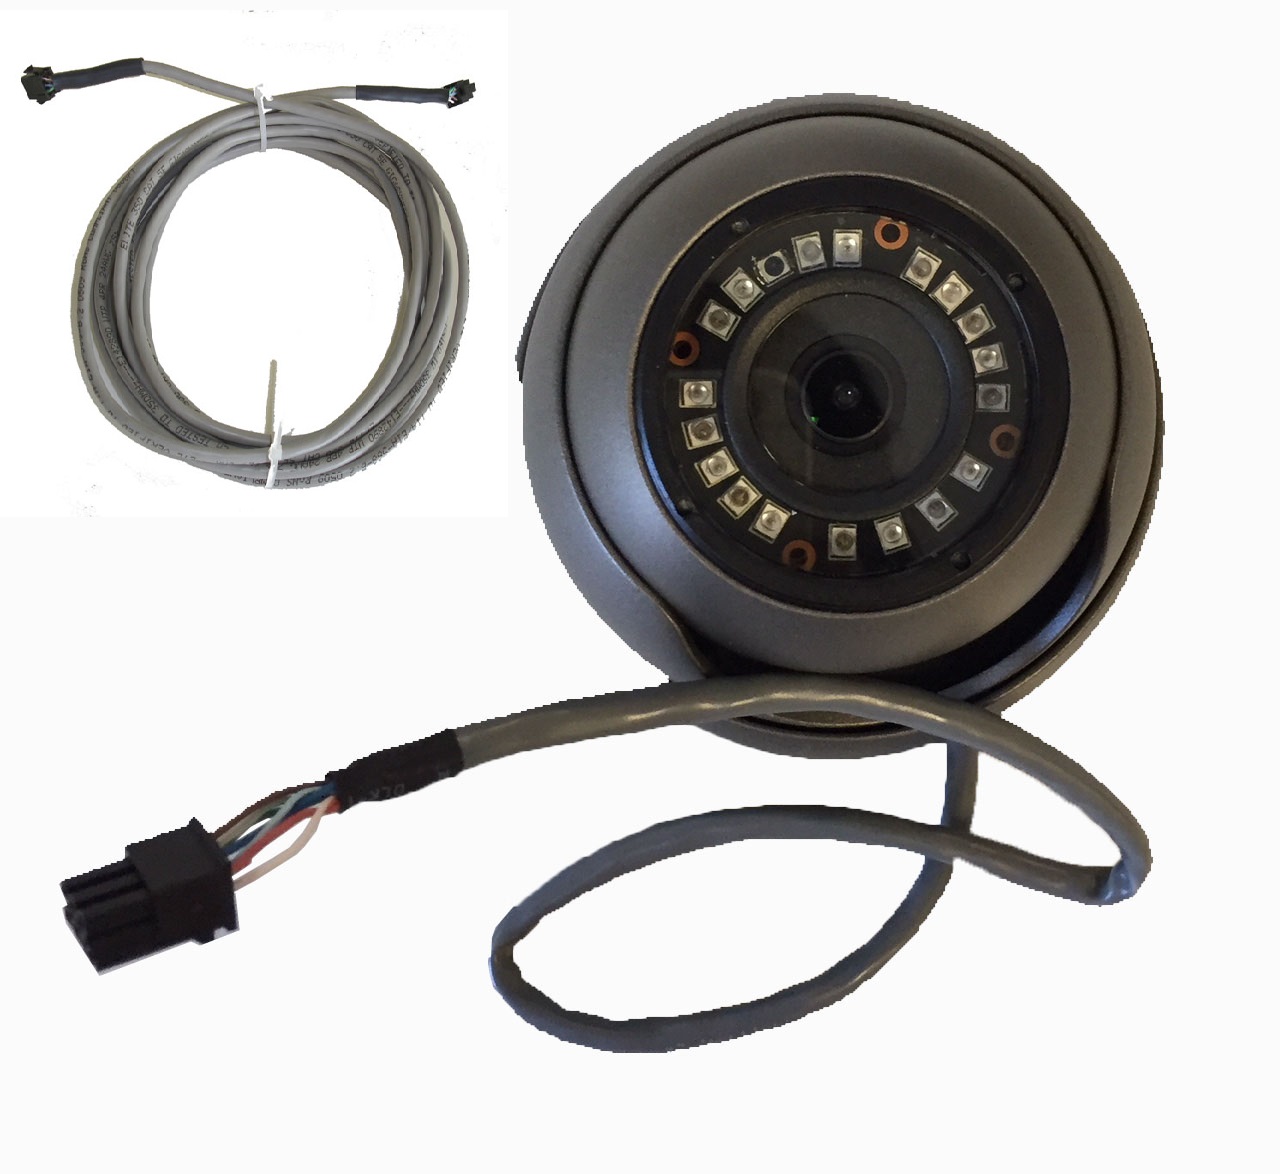 1000TLV Vandal/Weather Proof IR Bus Camera with 25' Camera Extension Cable